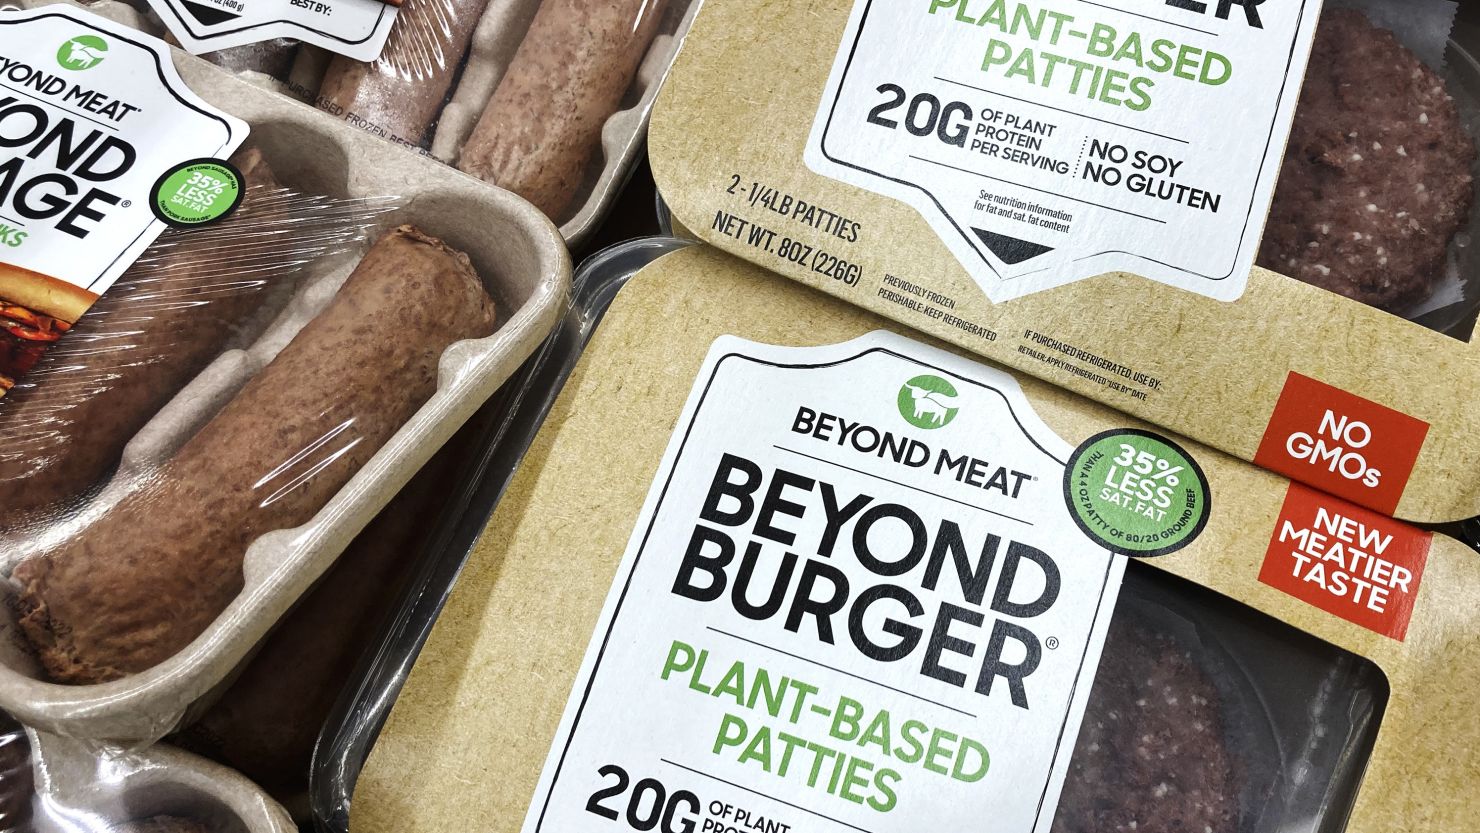 Beyond Meat products are seen in a refrigerated case inside a grocery store in Mount Prospect, Ill., Feb. 19, 2022.